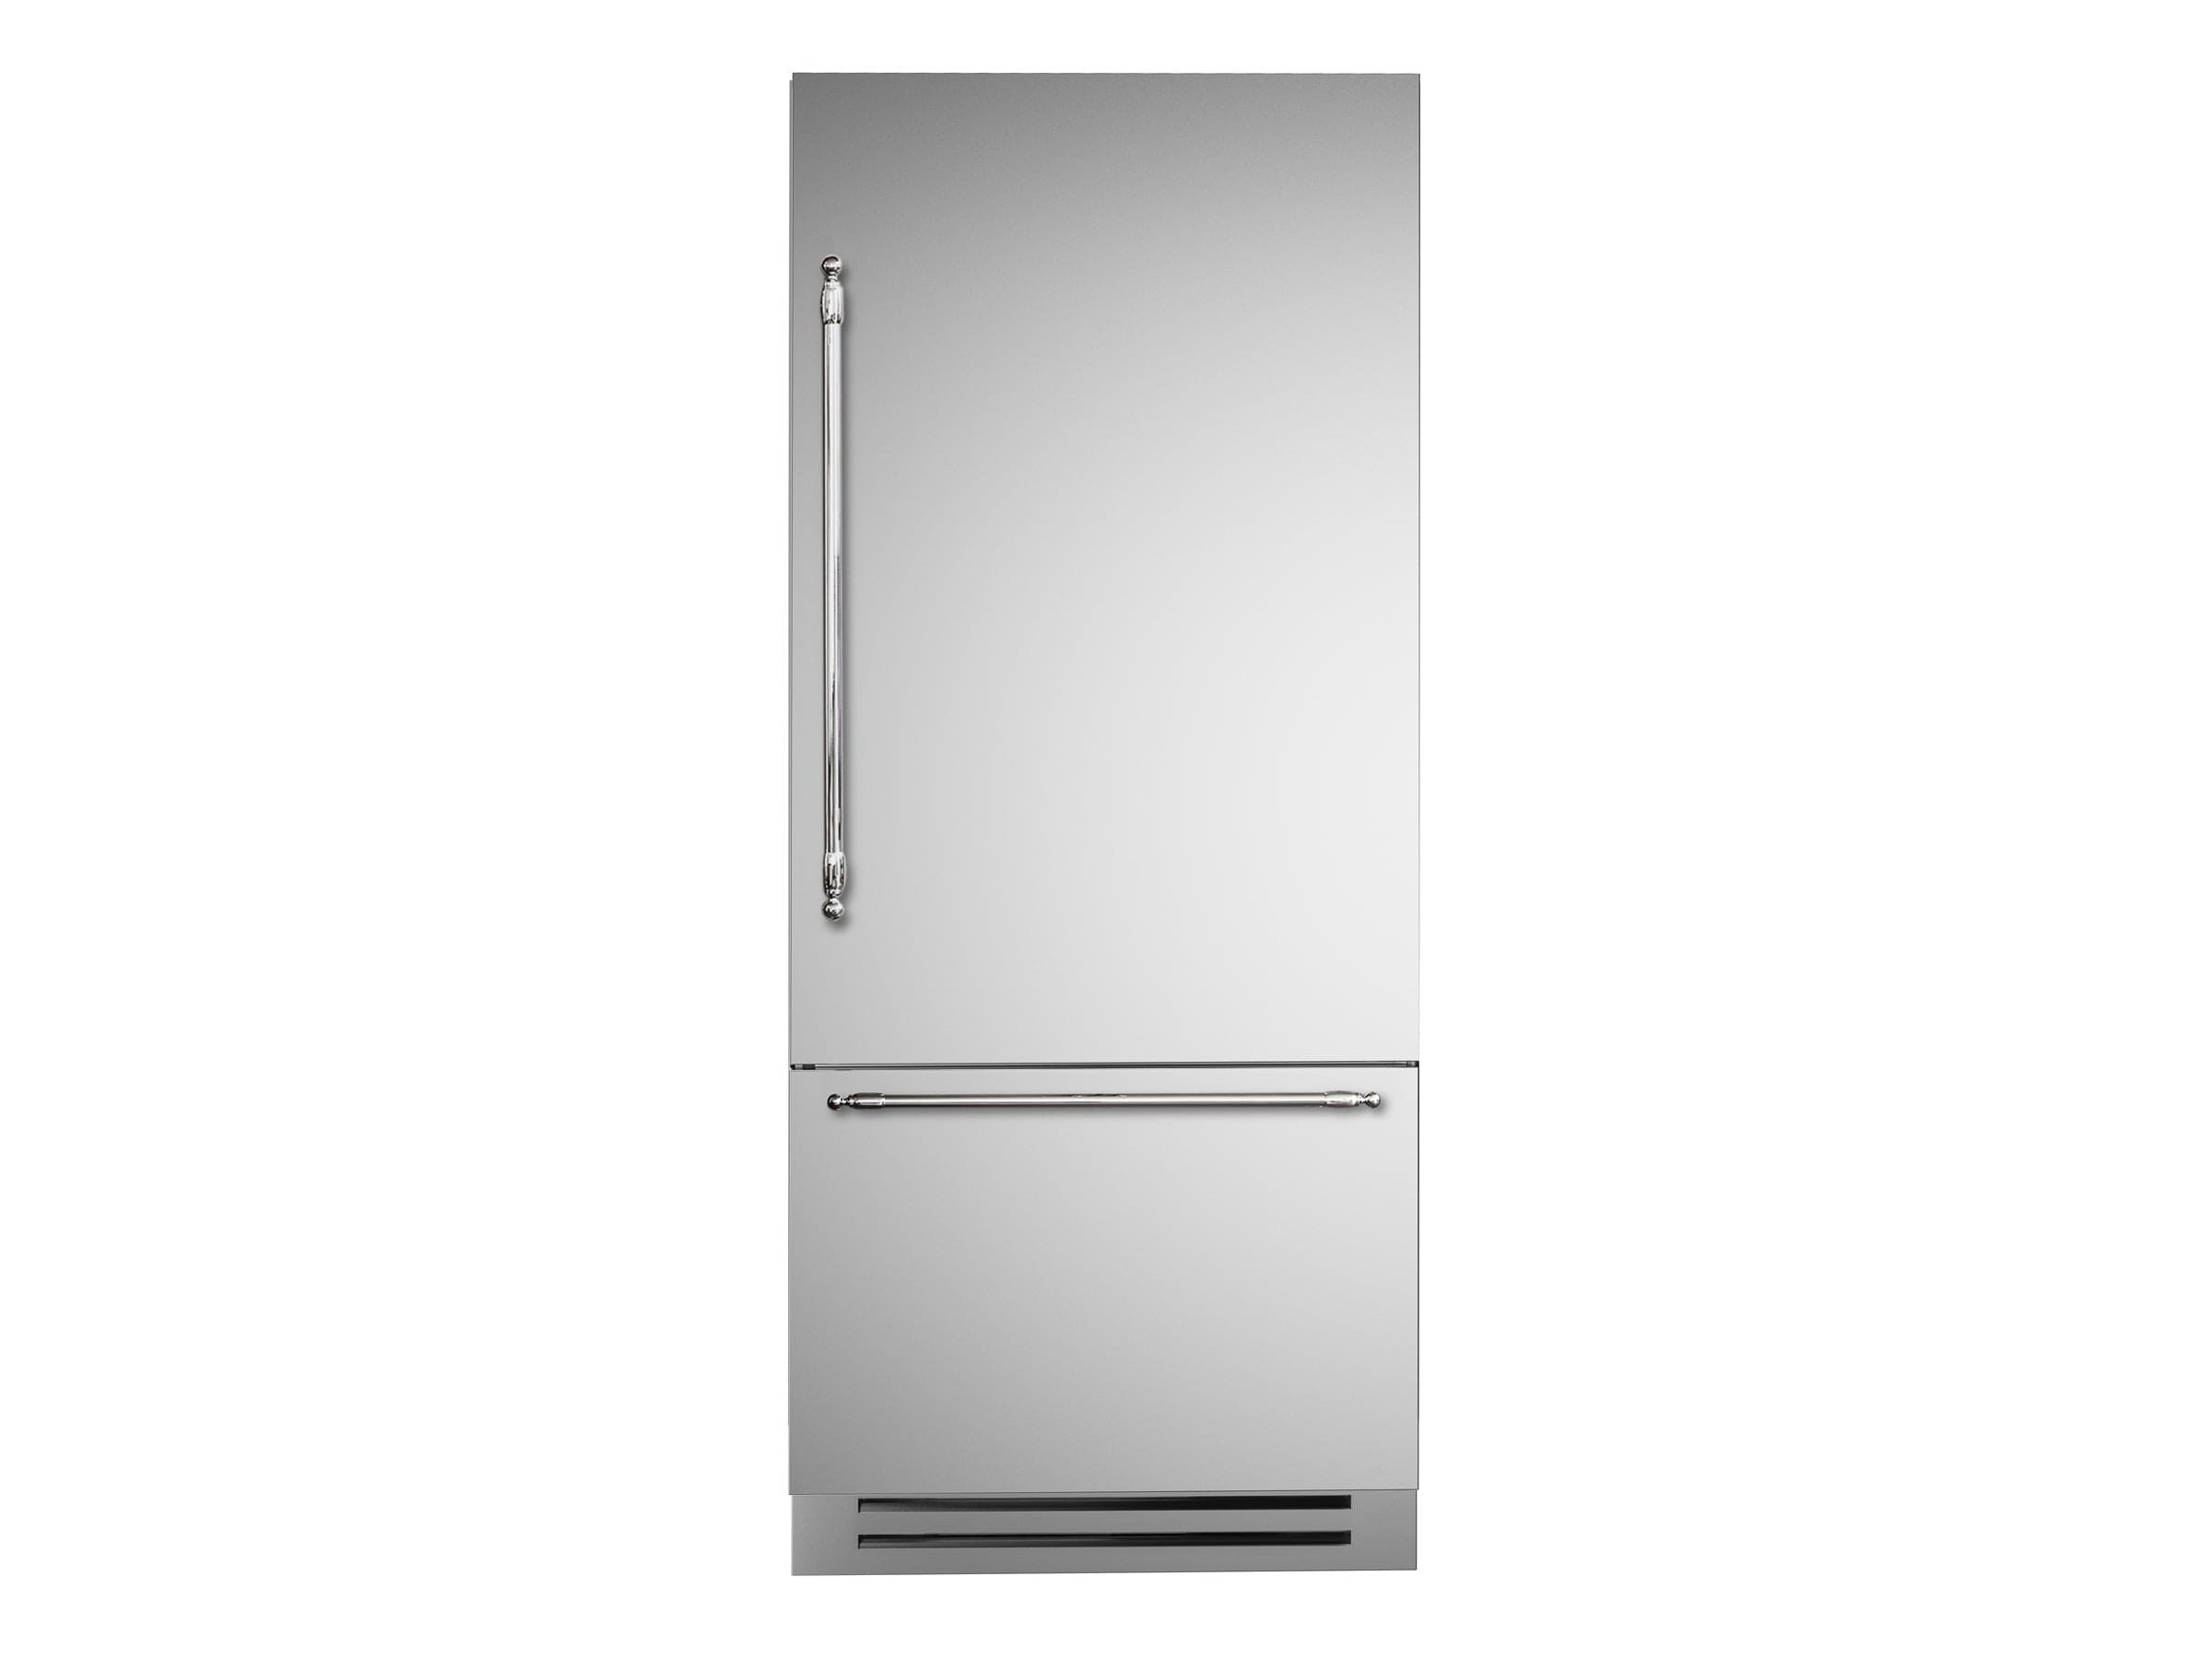 Bertazzoni 36" 19.6 Cu.Ft. Stainless Steel Built-In Bottom Mount Refrigerator With Ice Maker and Right Swing Door REF36BMBIXRT Luxury Appliances Direct